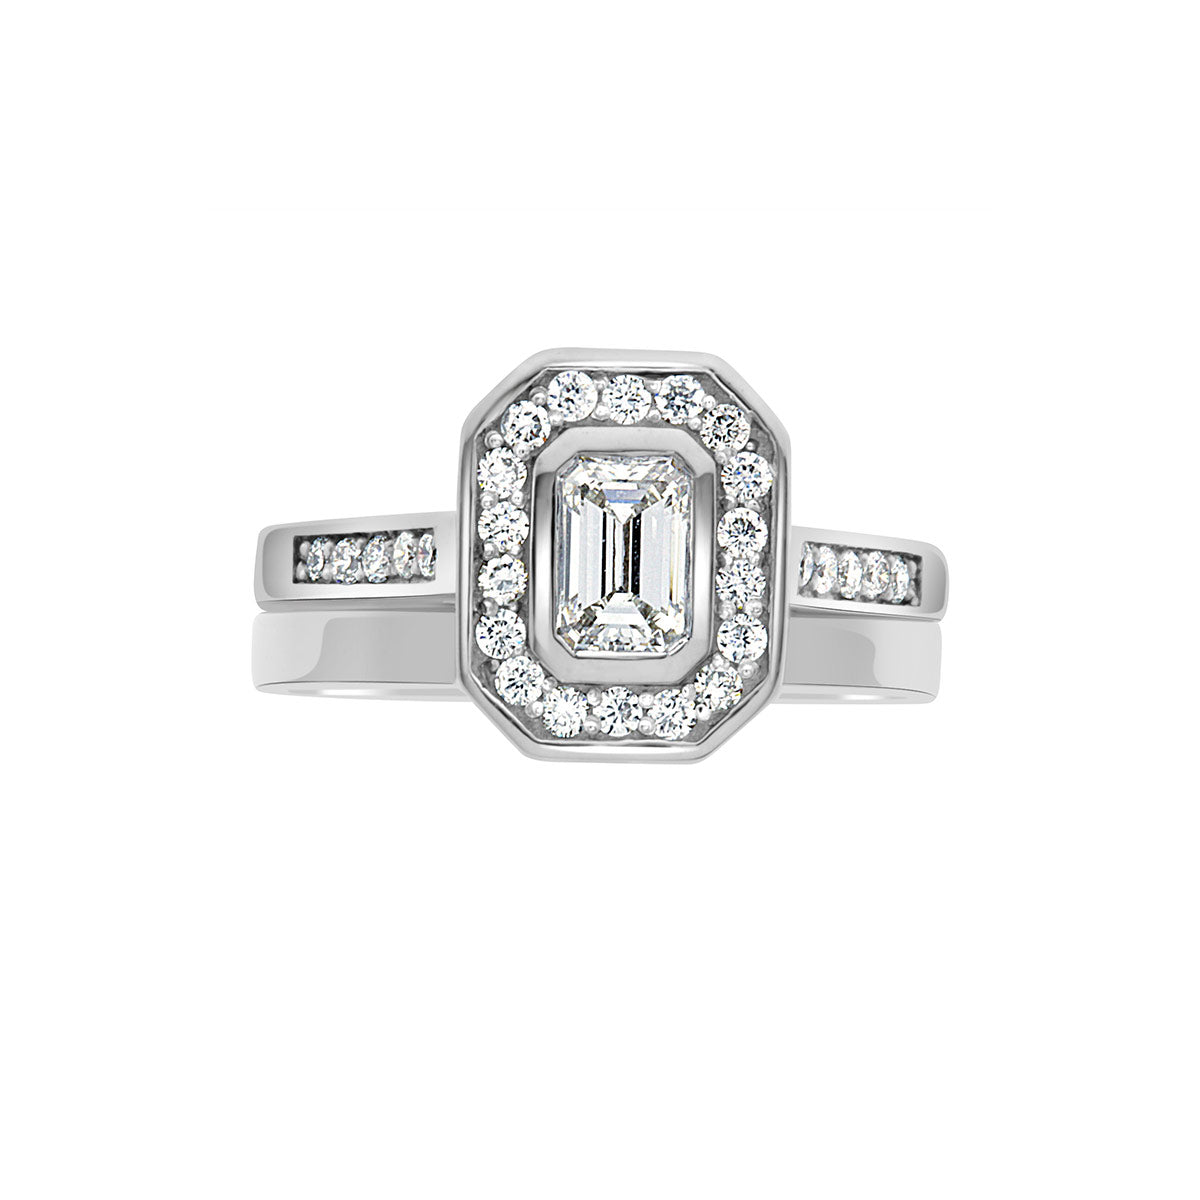 Emerald Cut Halo Ring in white gold with a matching wedding ring